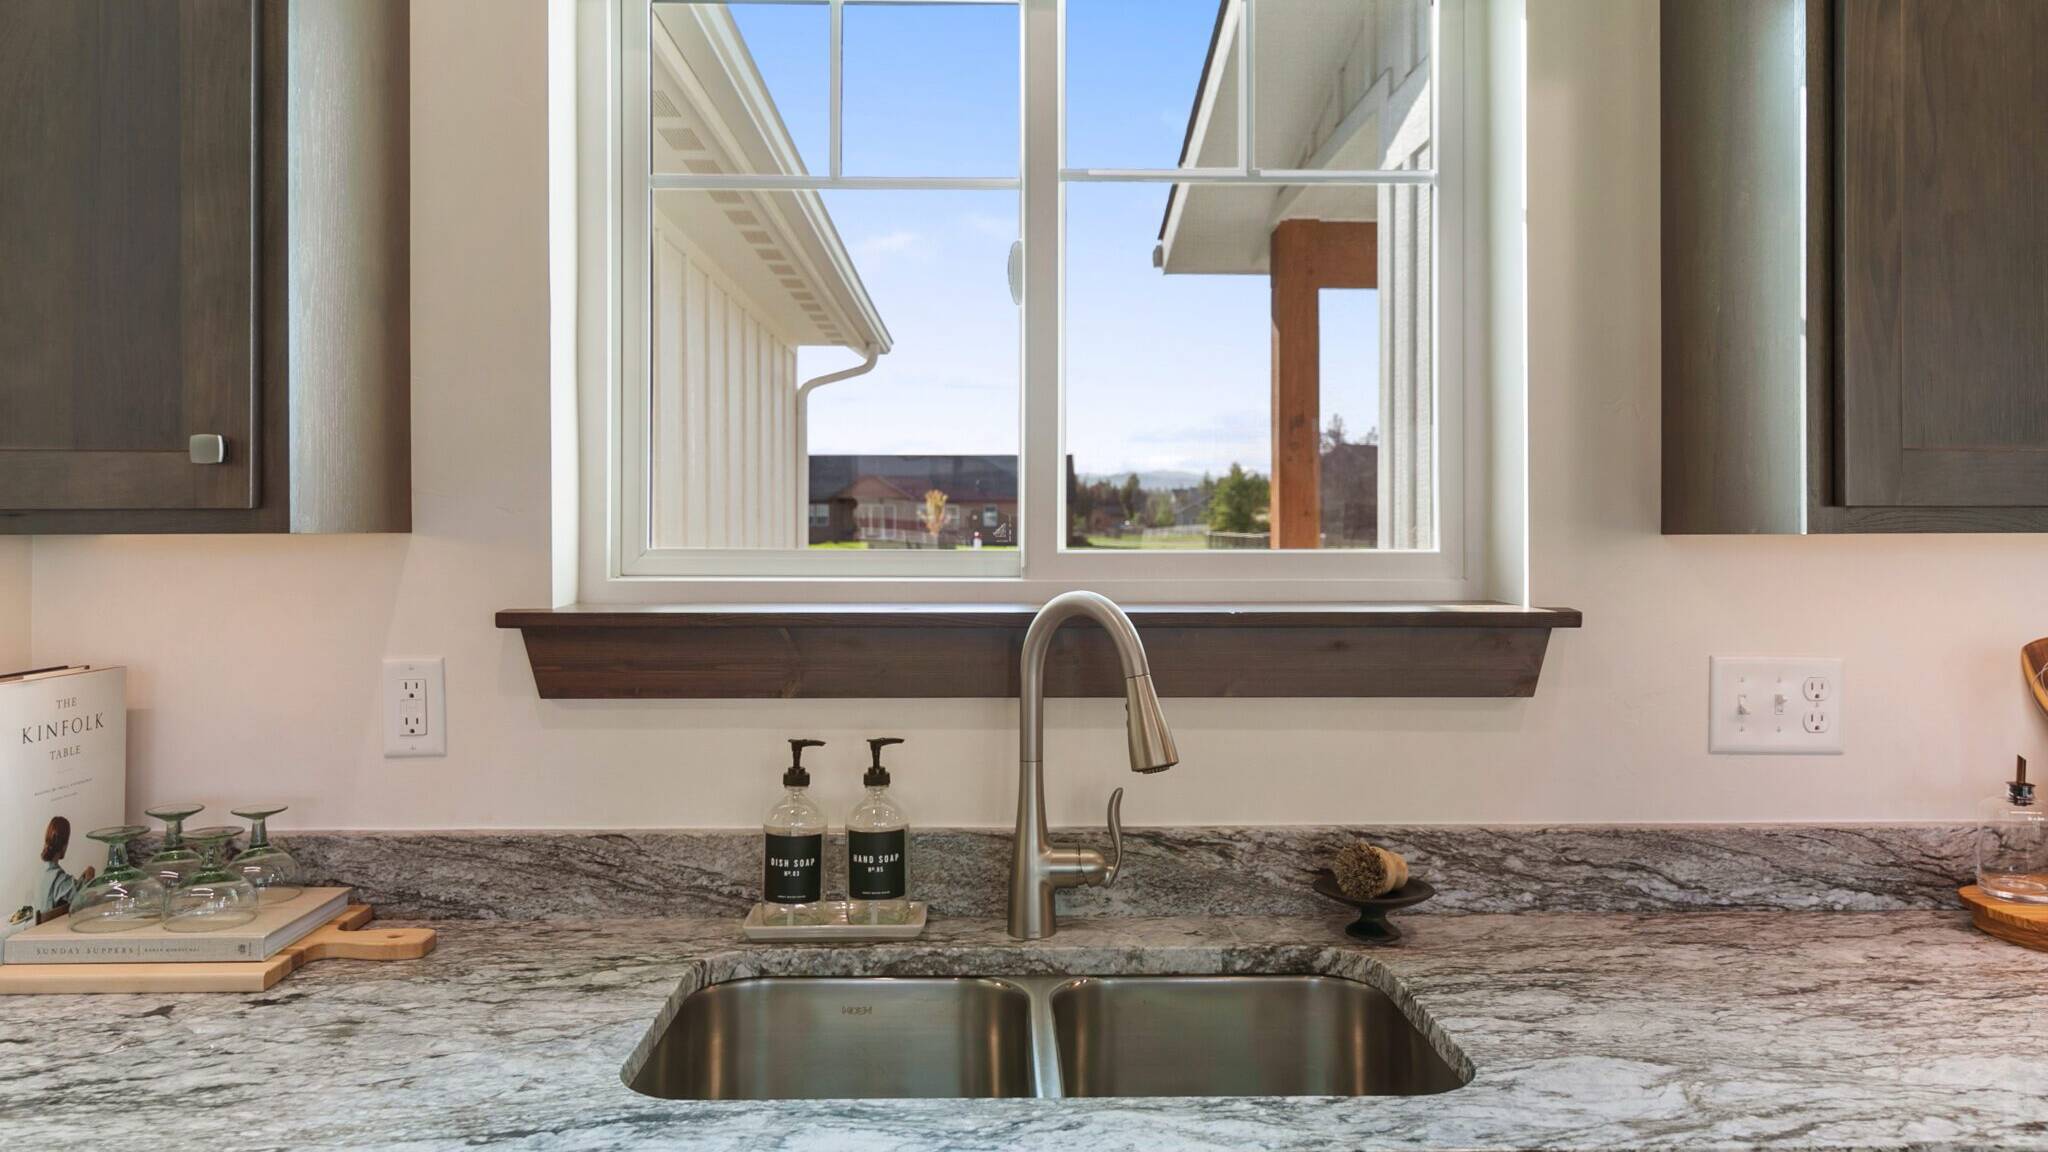 Kitchen sink in The Seeley model home - Built by Big Sky Builder in Hamilton, MT